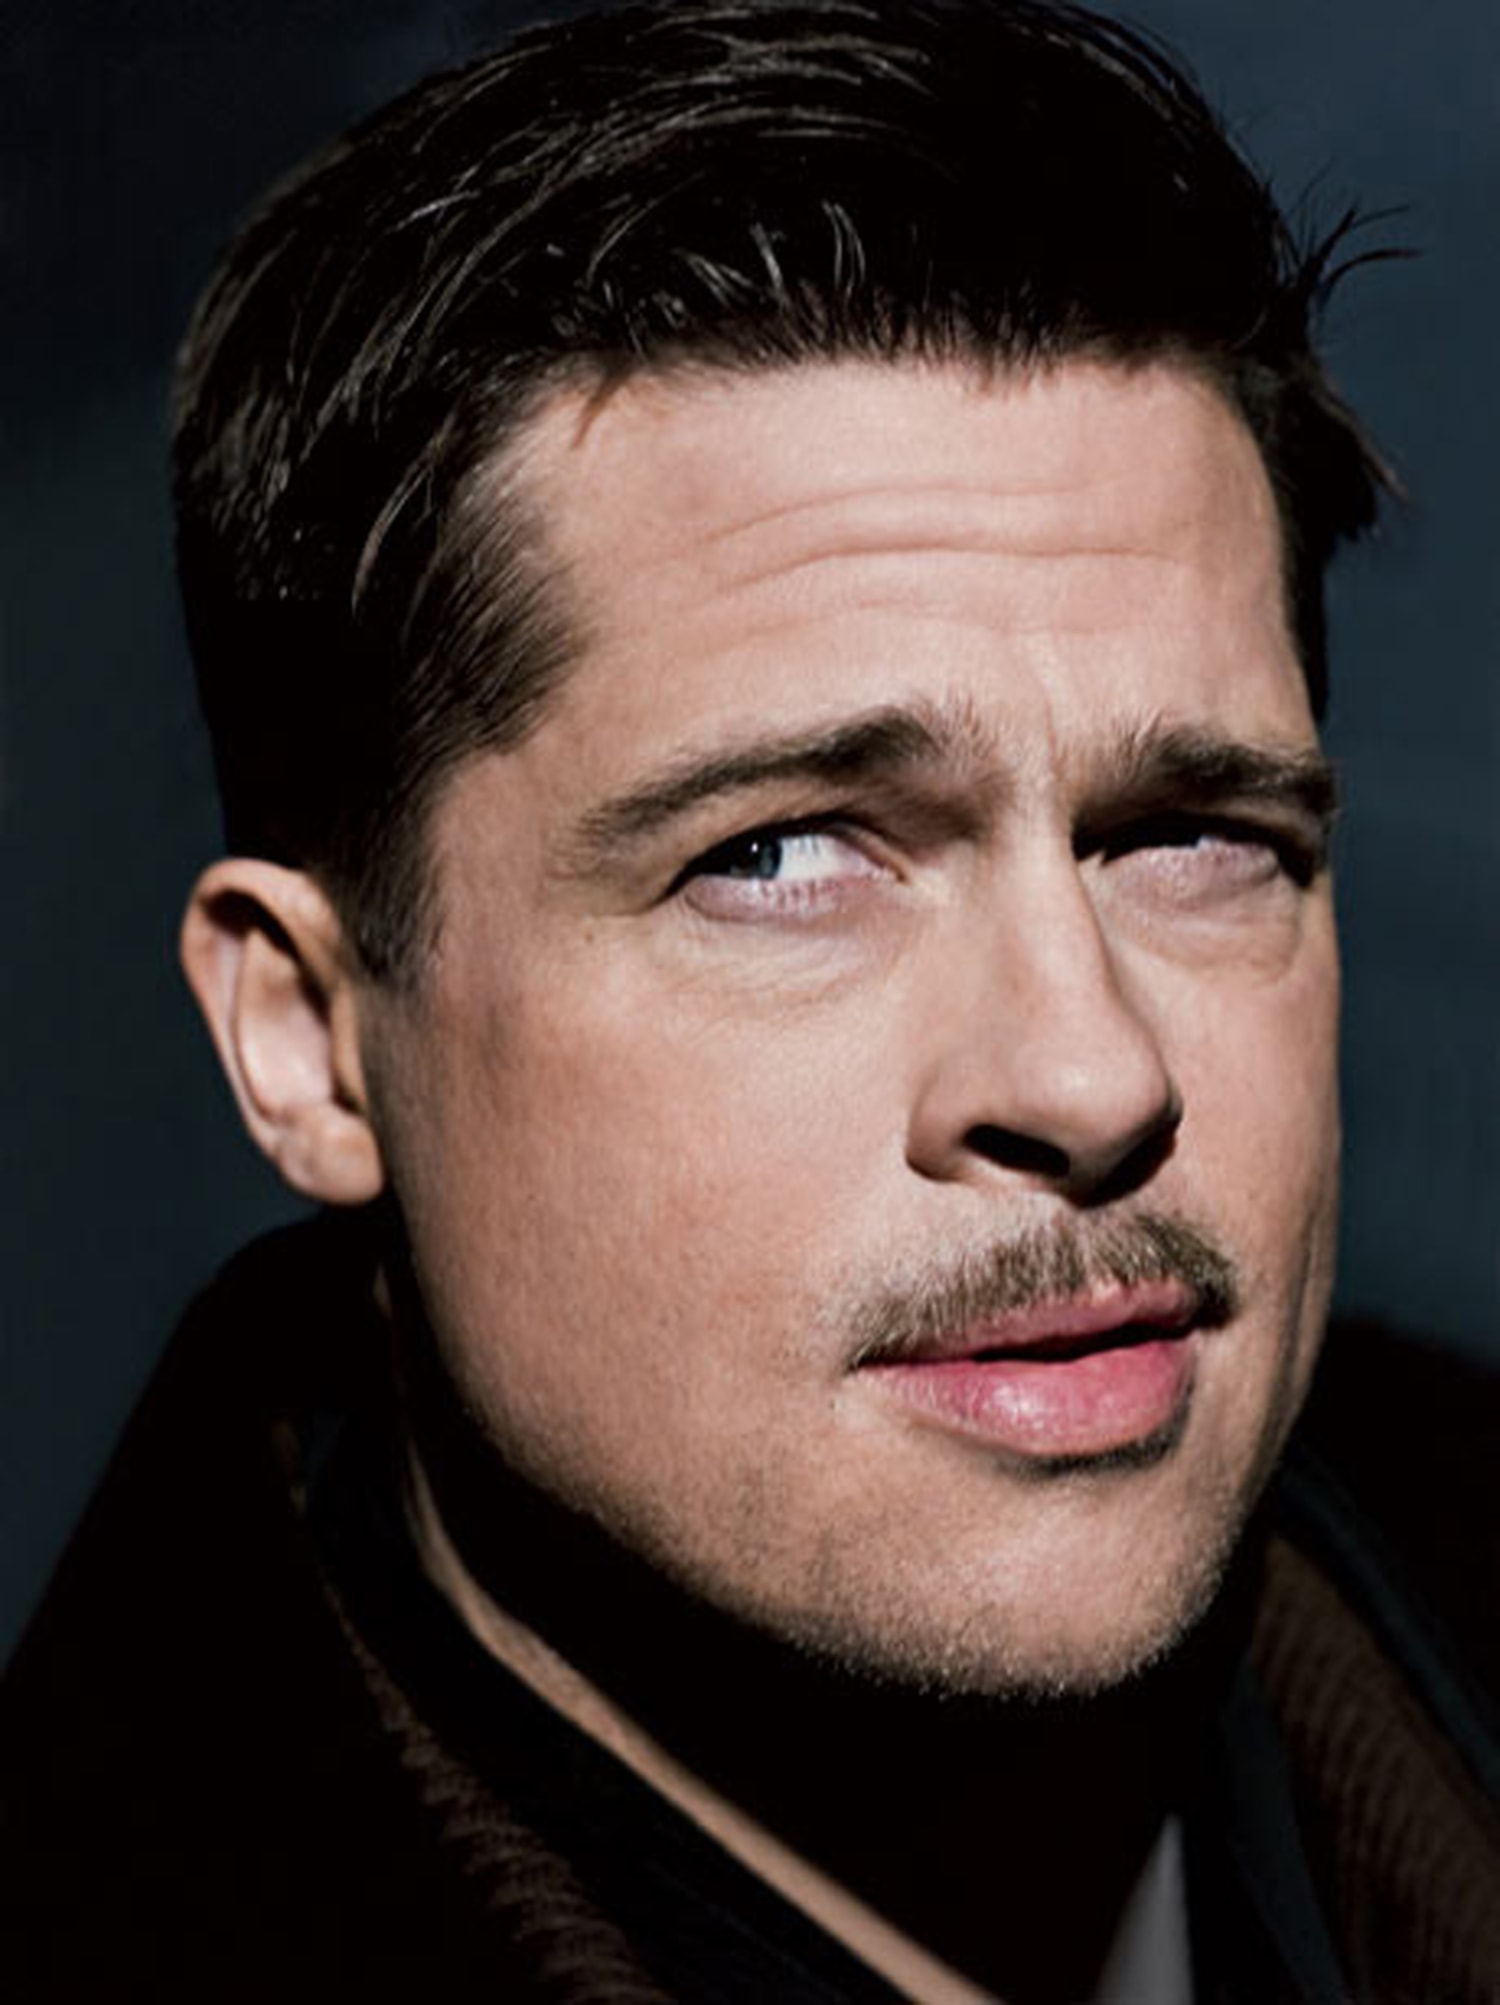 6 Best Mustache Styles That'll Make You Look Like a Movie Star